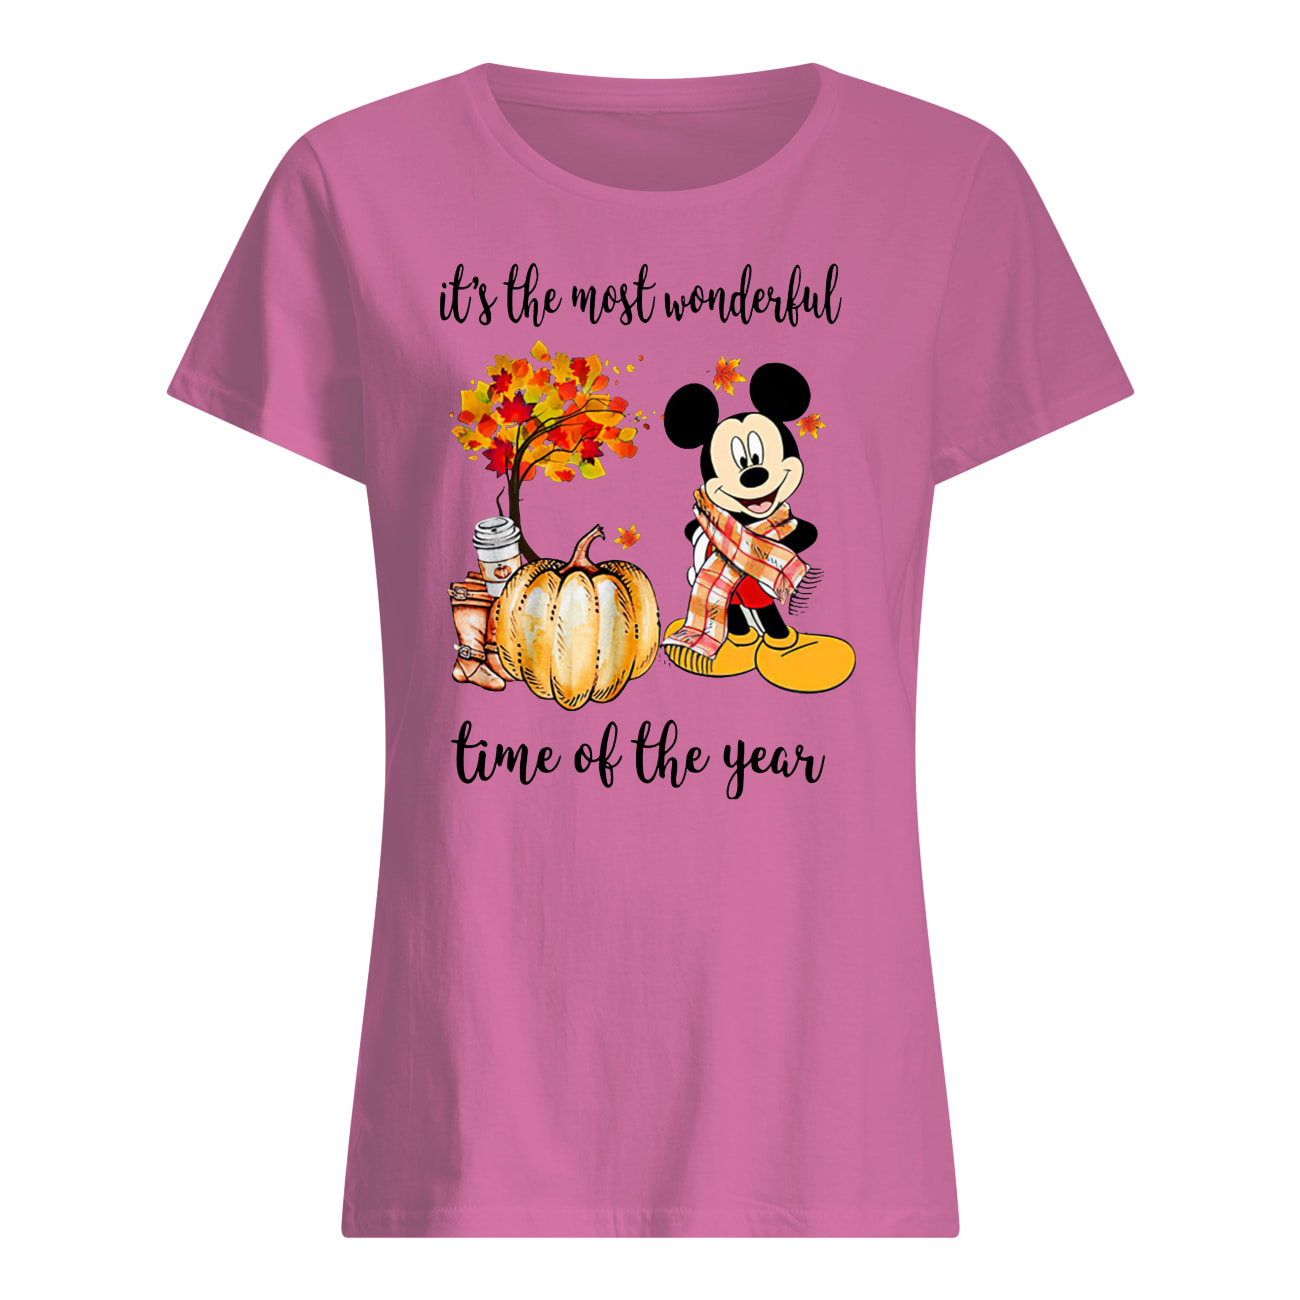 Mickey mouse it’s the most wonderful time of the year women's shirt